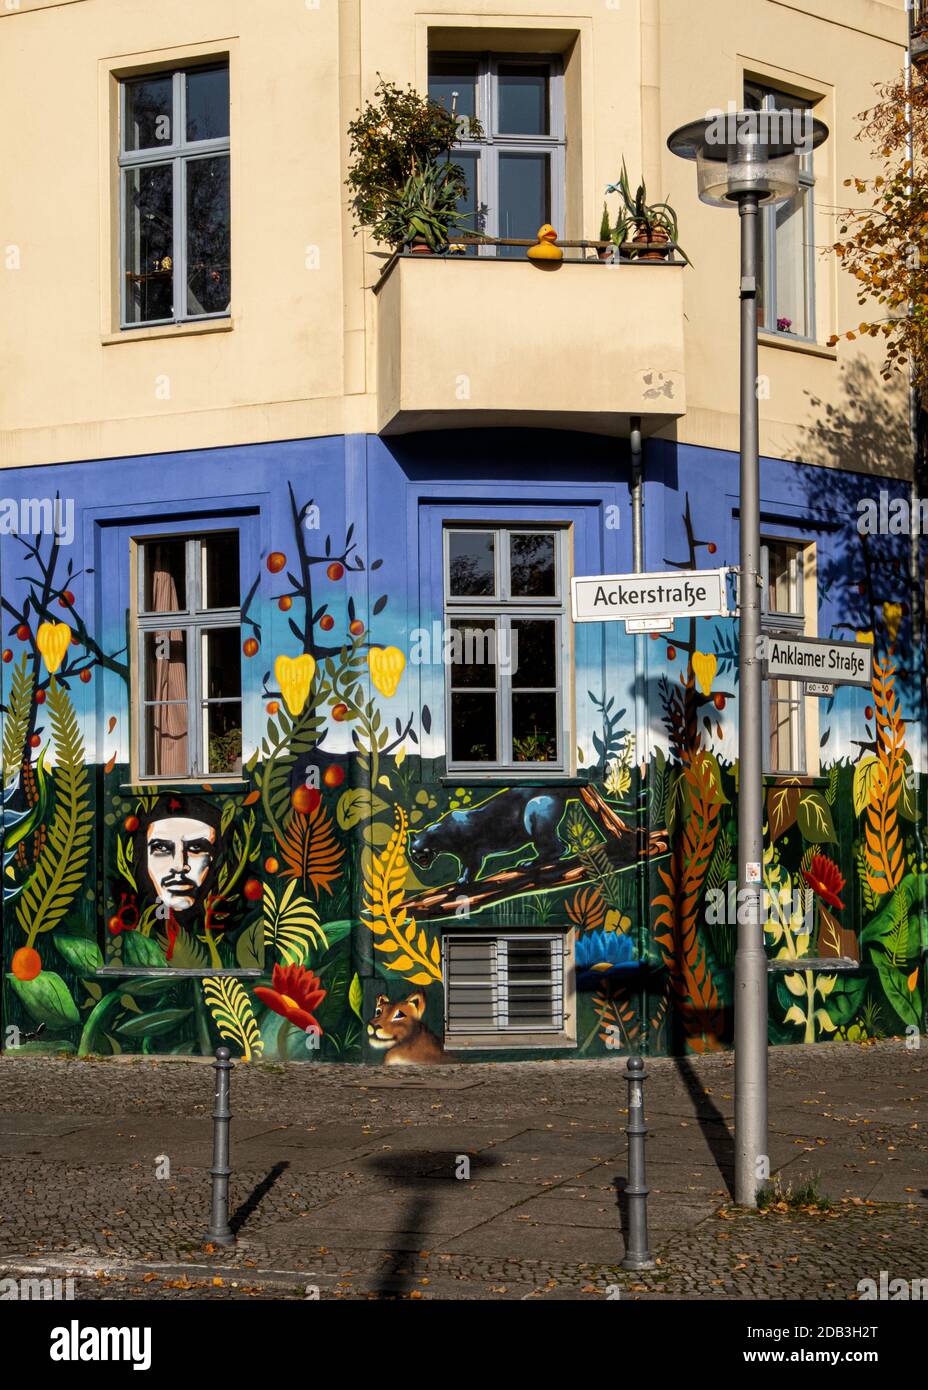 Berlin, Mitte, Anklamer strasse 60. Decorative exterior of apartment building. Painting of flowers,famous men, and animals Stock Photo